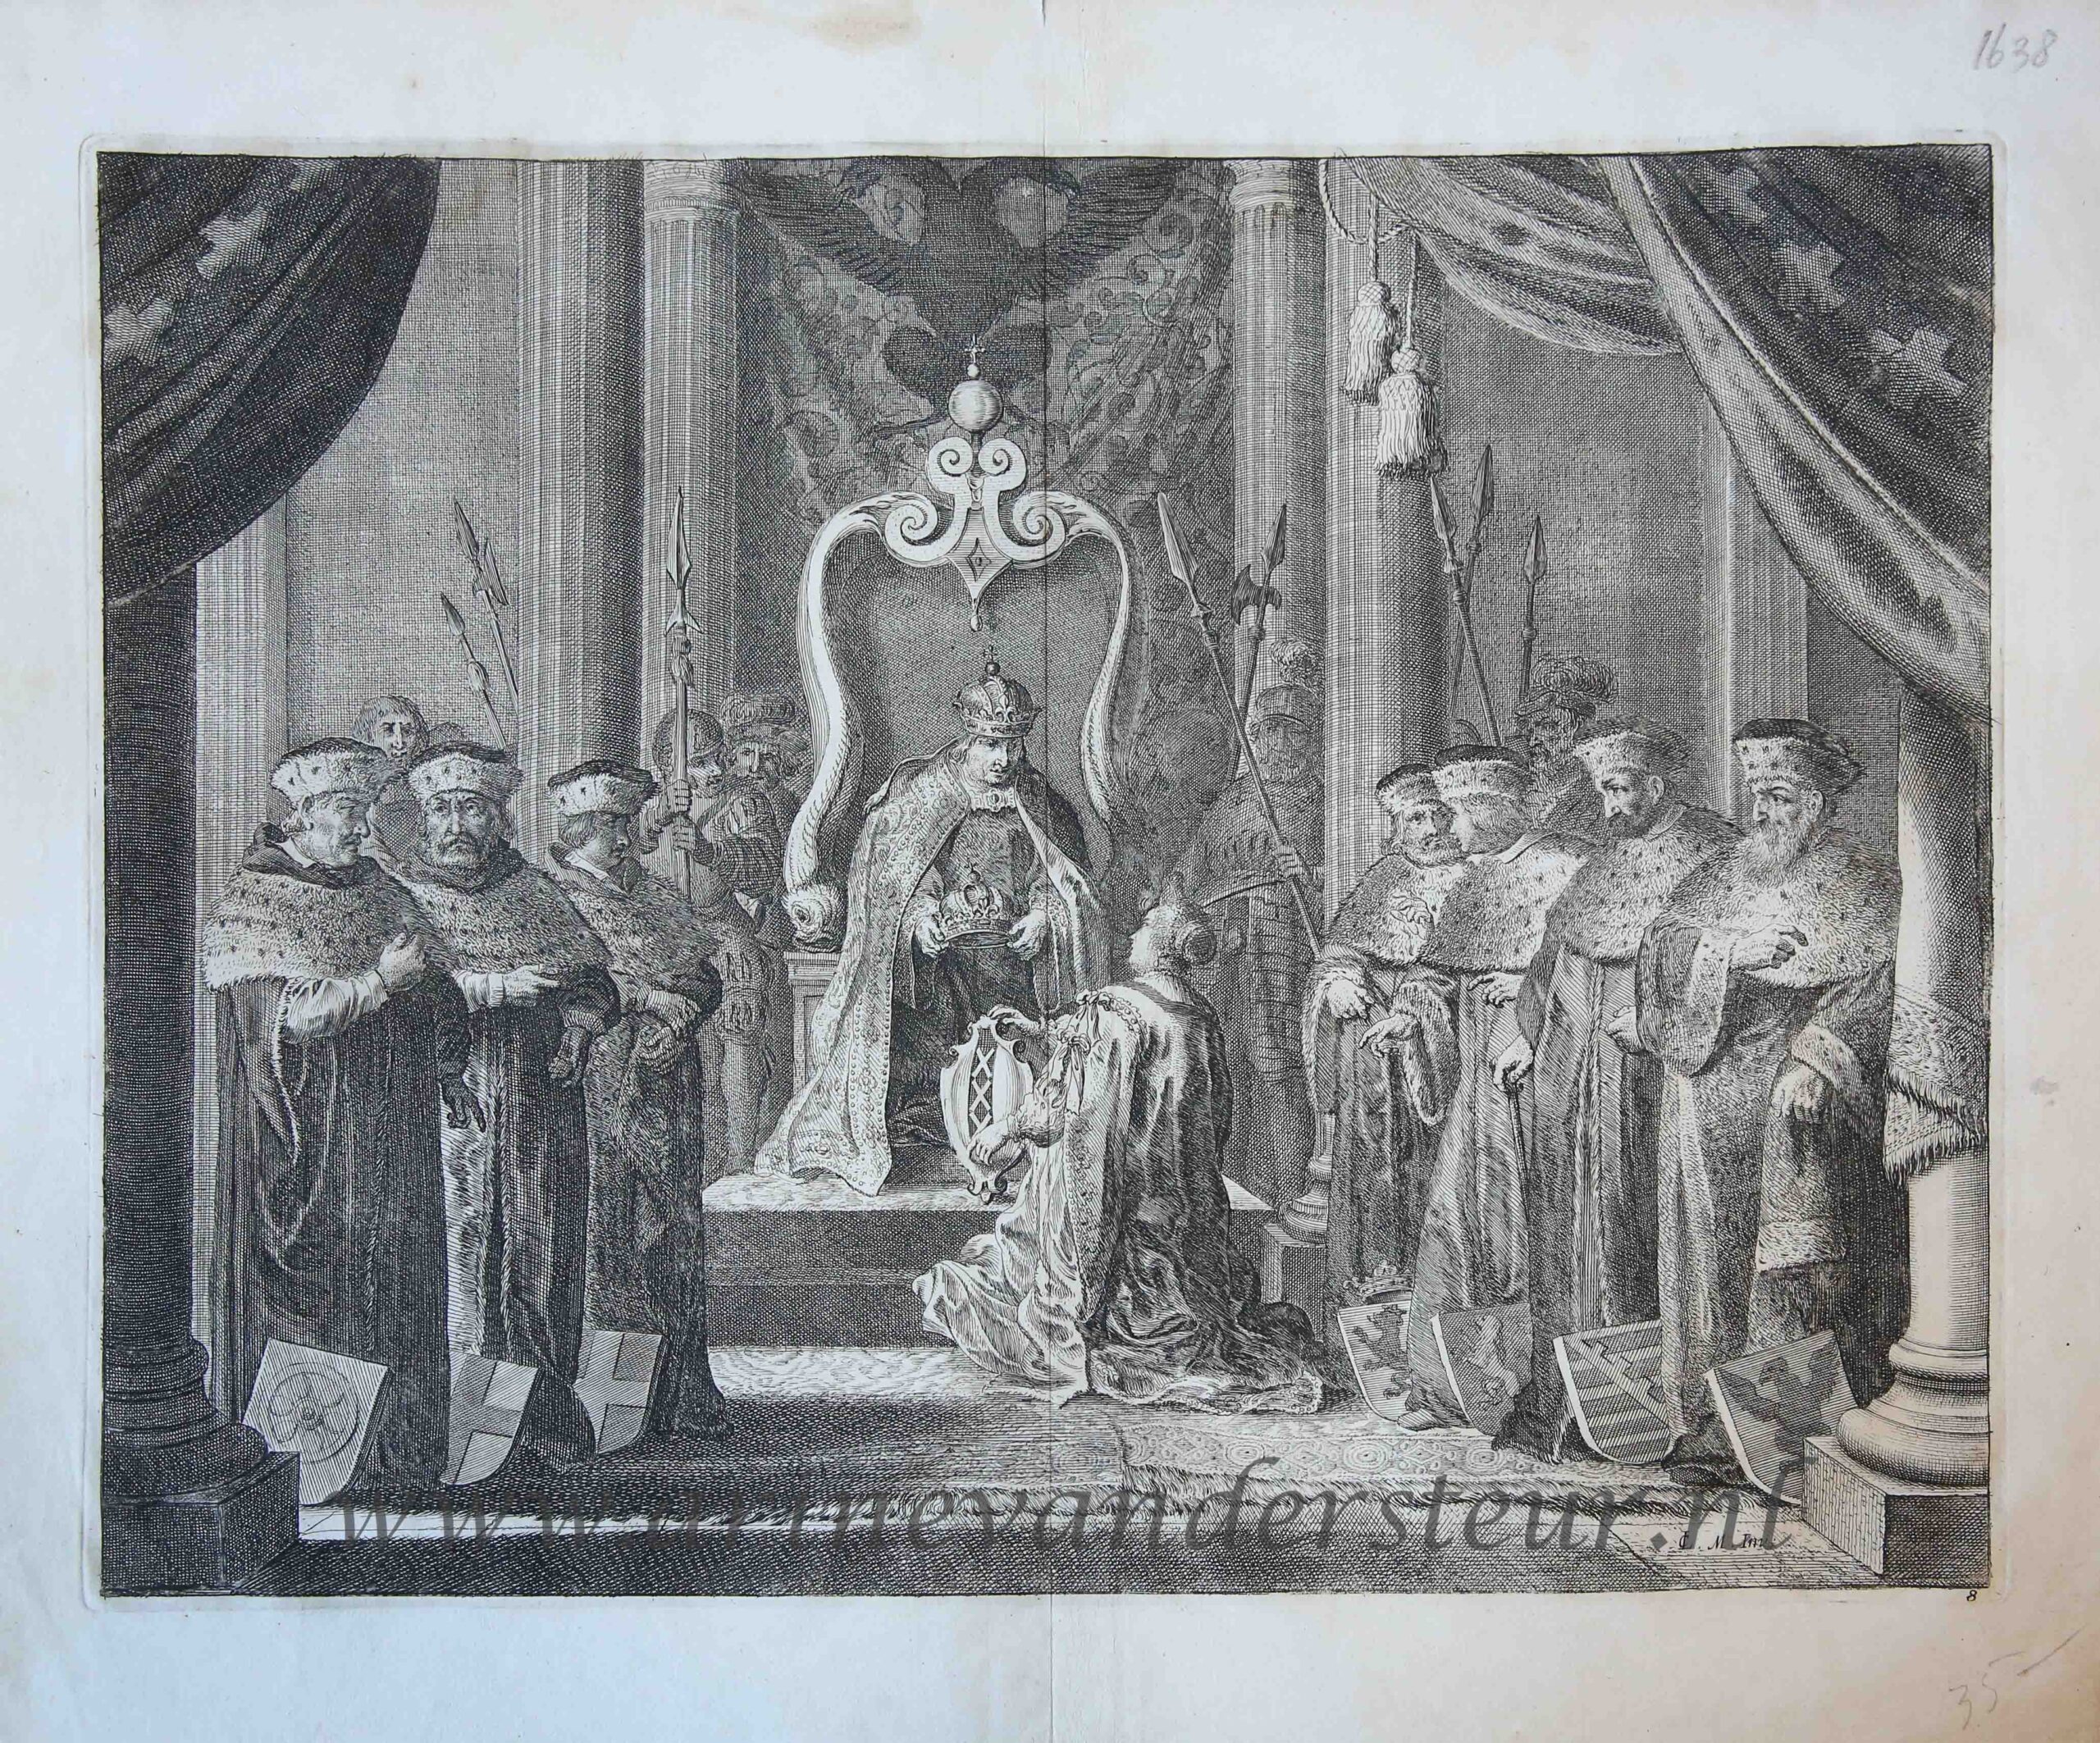 [Antique history print, etching] Amsterdam receives the imperial crown from Emperor Maximilian, published 1639.